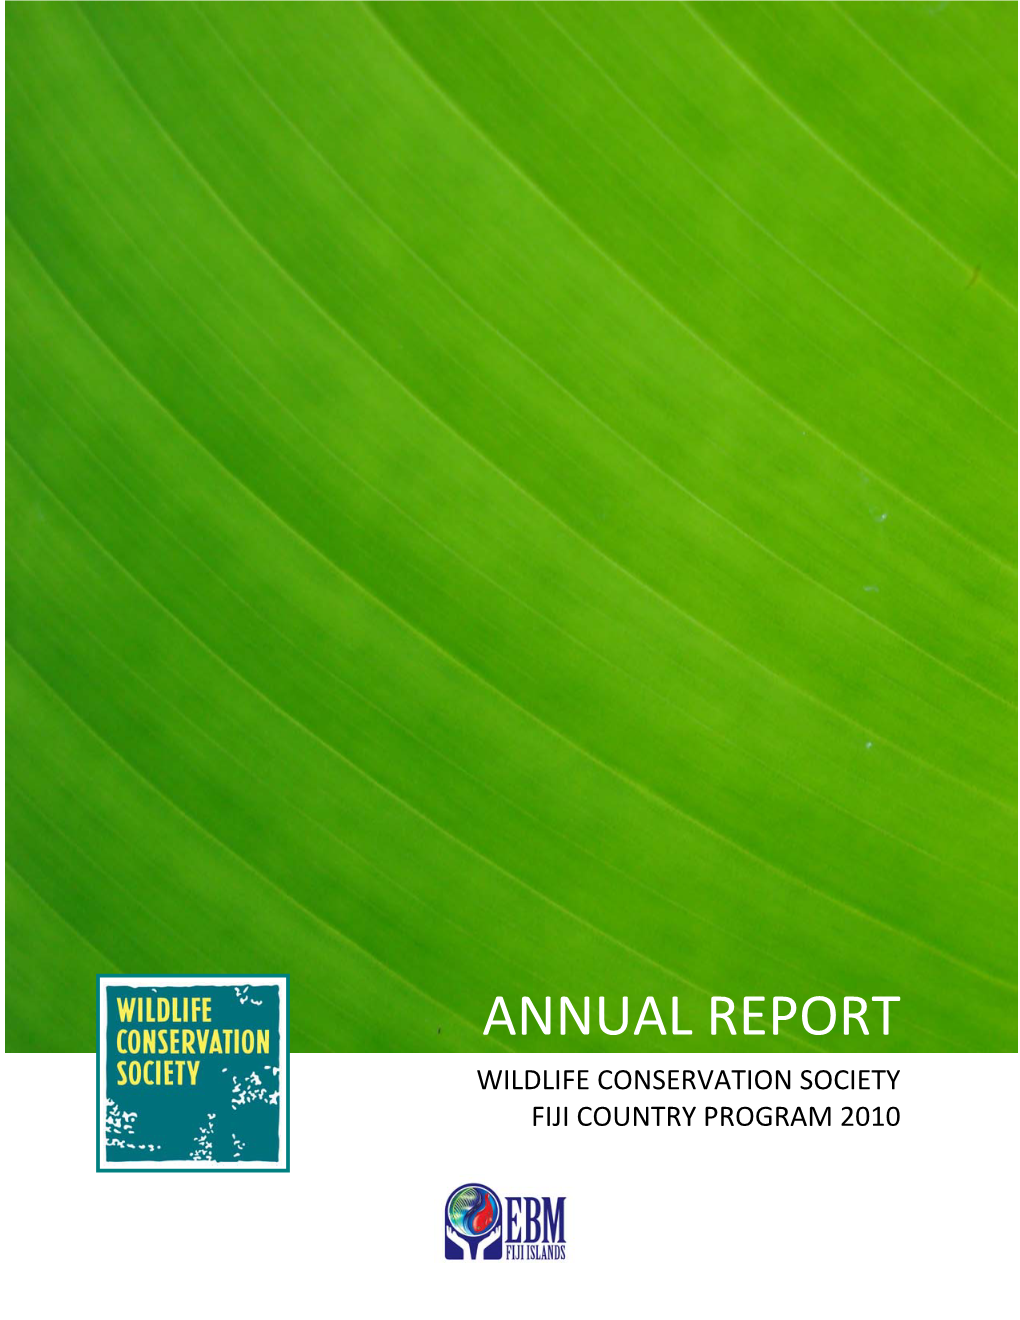 Annual Report Wildlife Conservation Society Fiji Country Program 2010